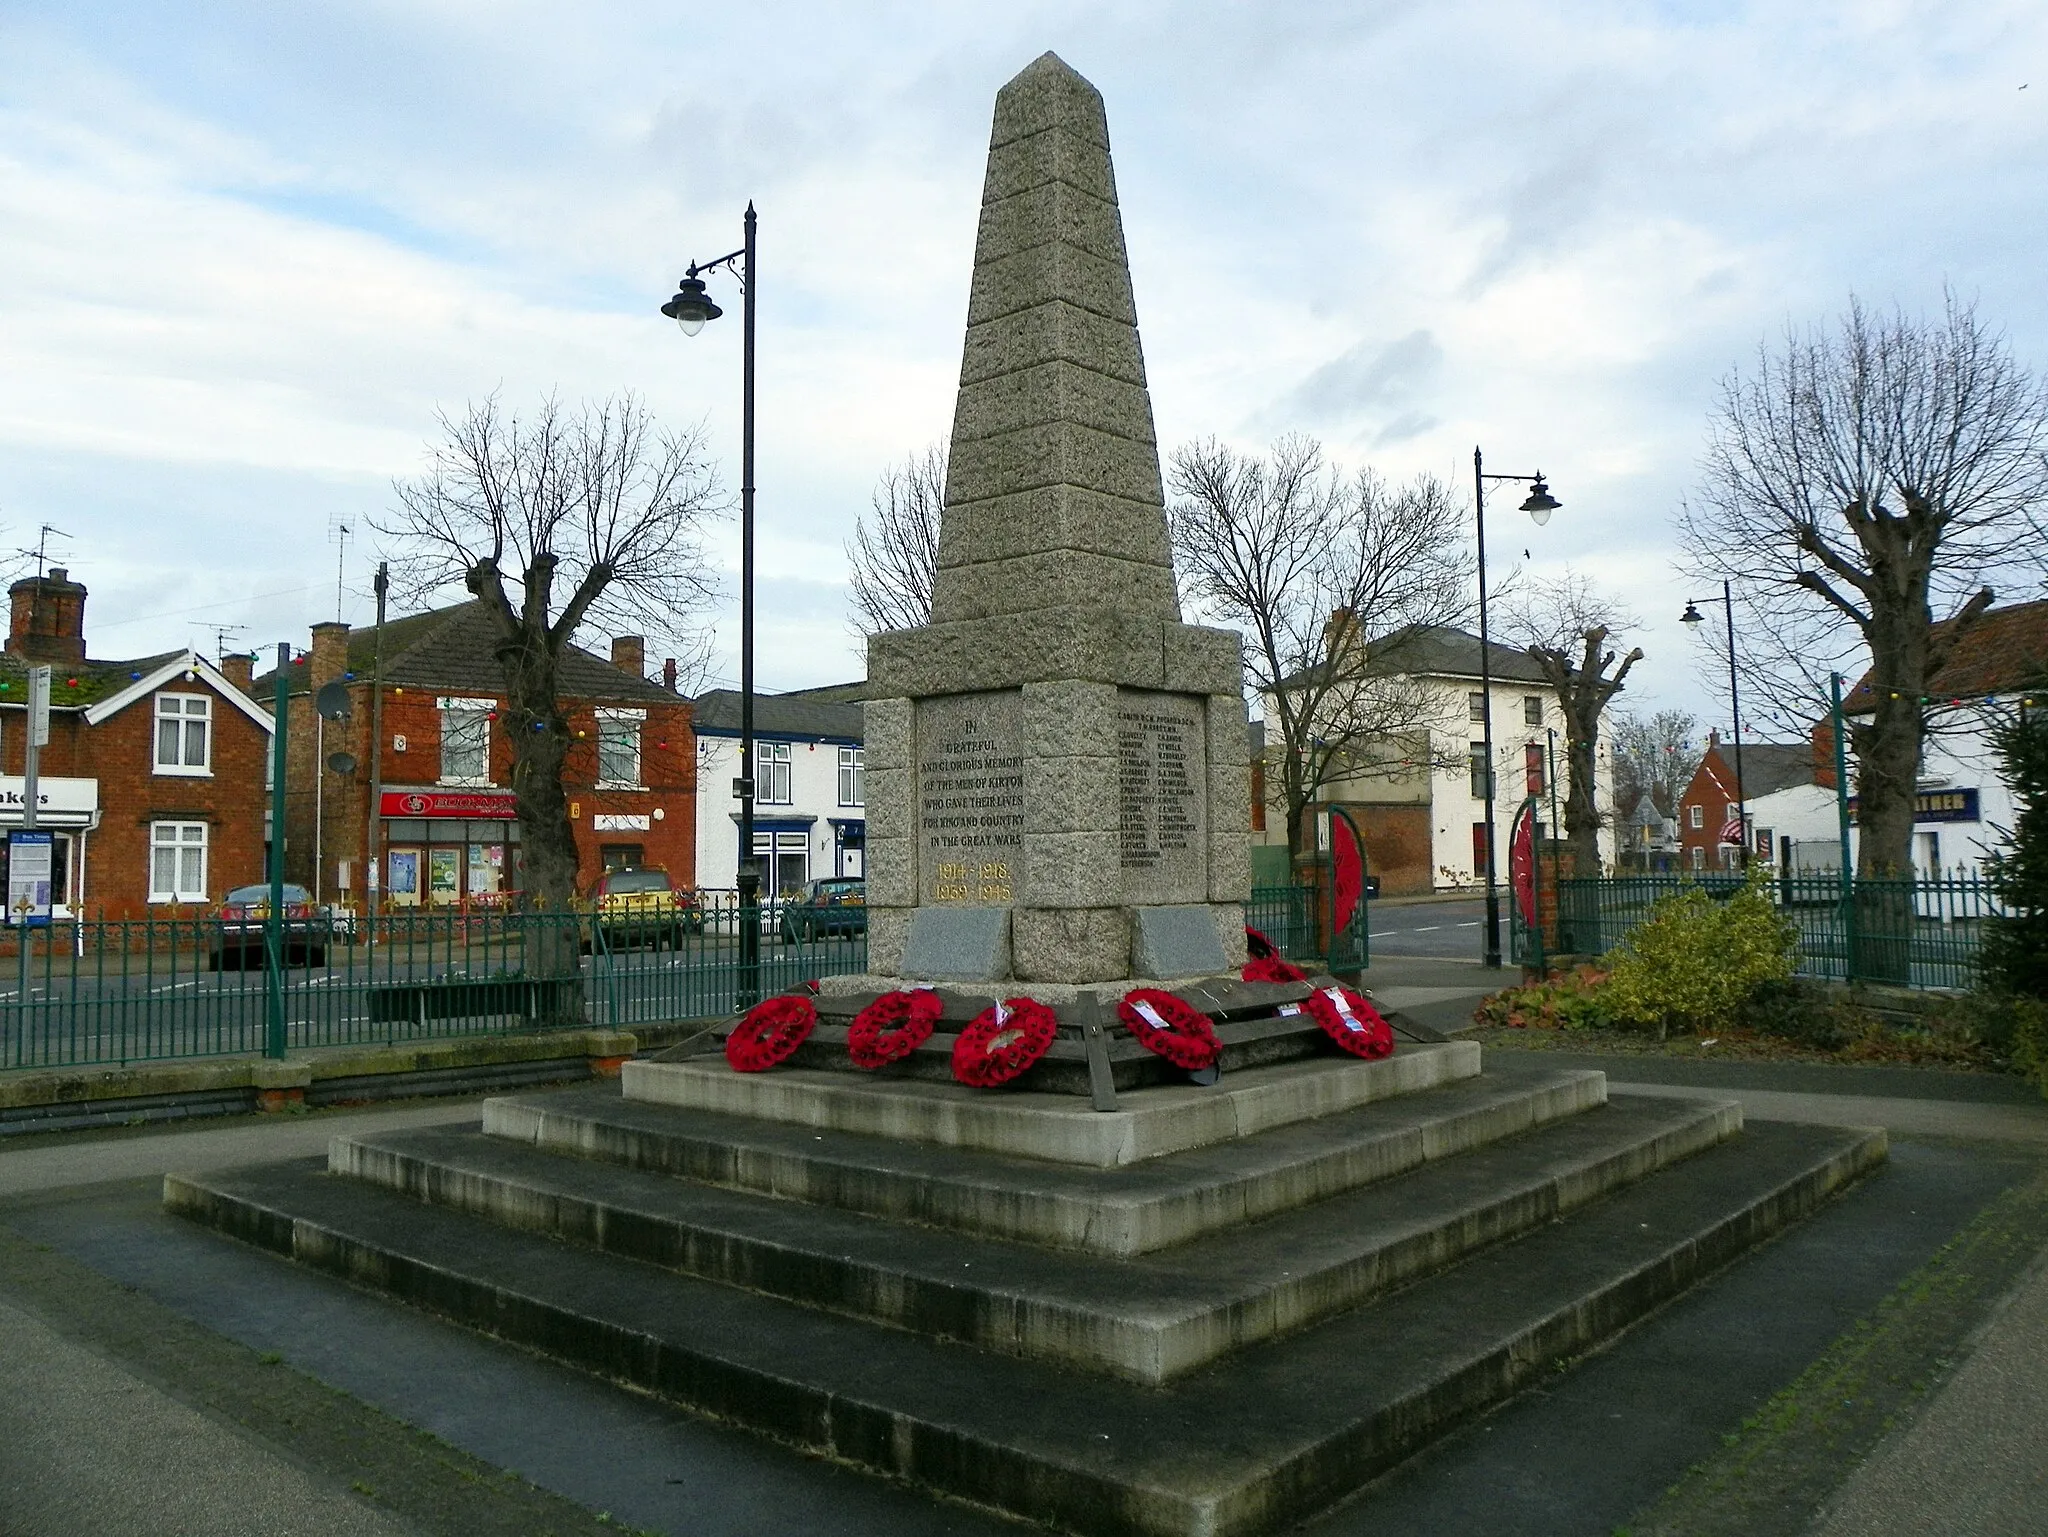 Photo showing: War memorial, Kirton, Lincolnshire (not listed), 26 December 2015.

To see my collections, go here.